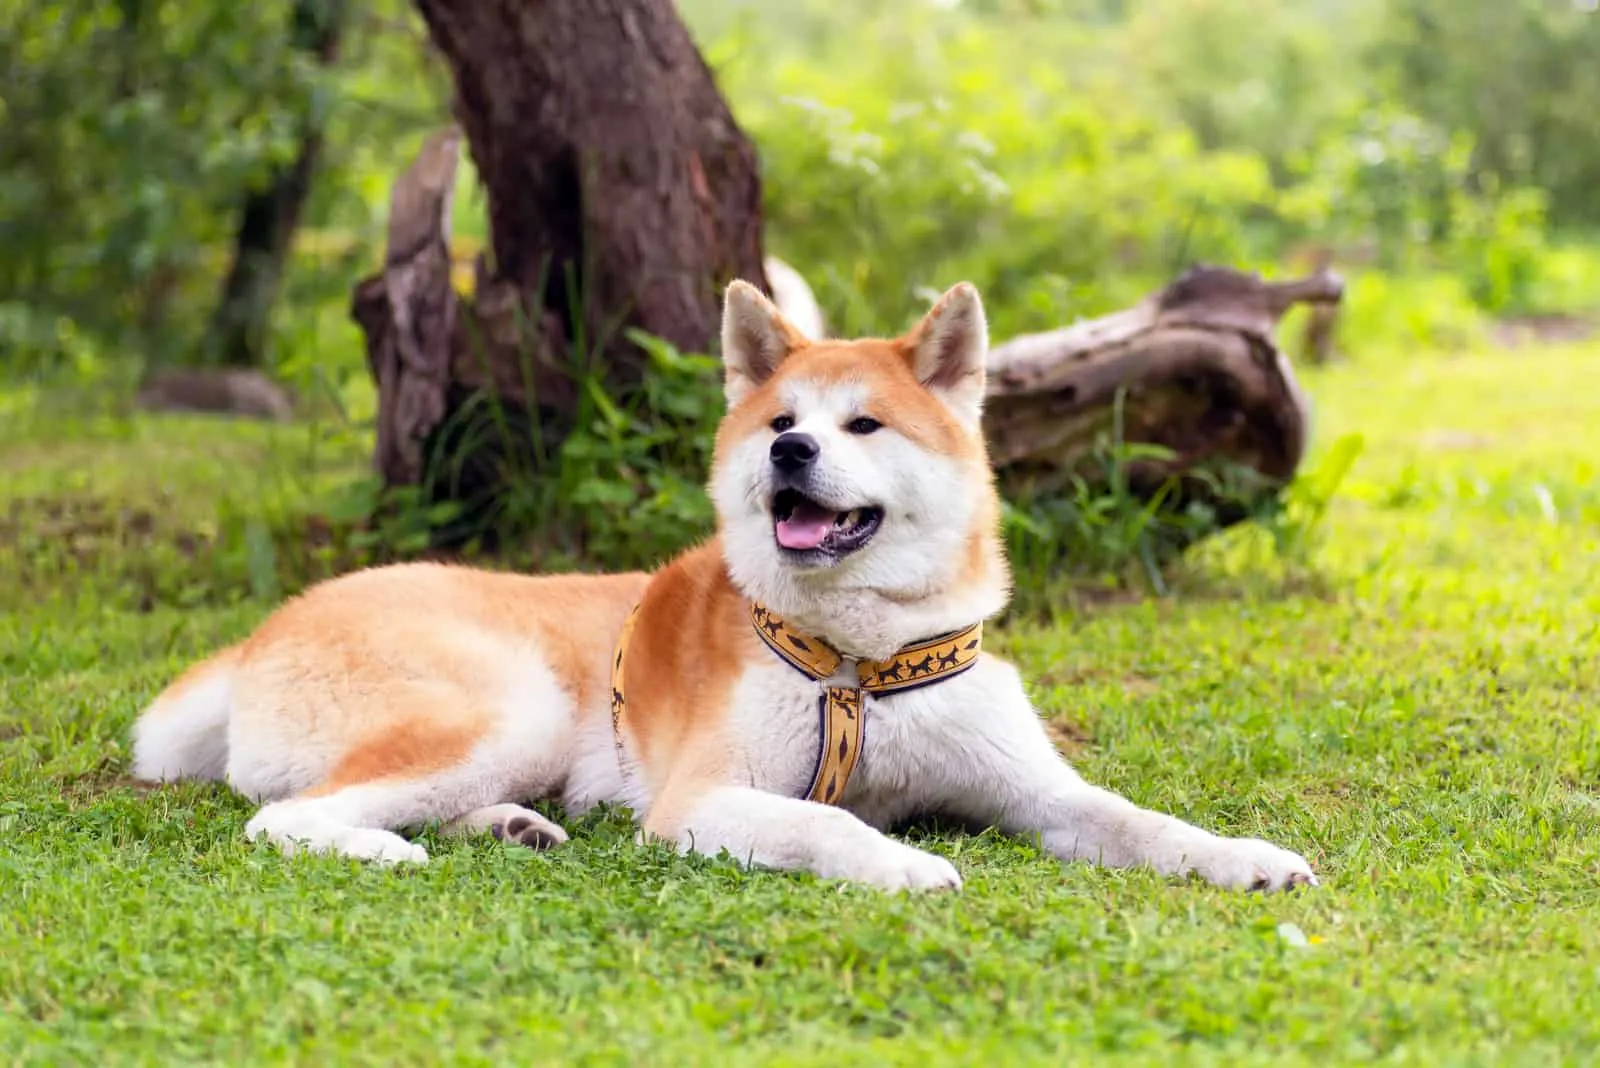 Akita is lying on the grass